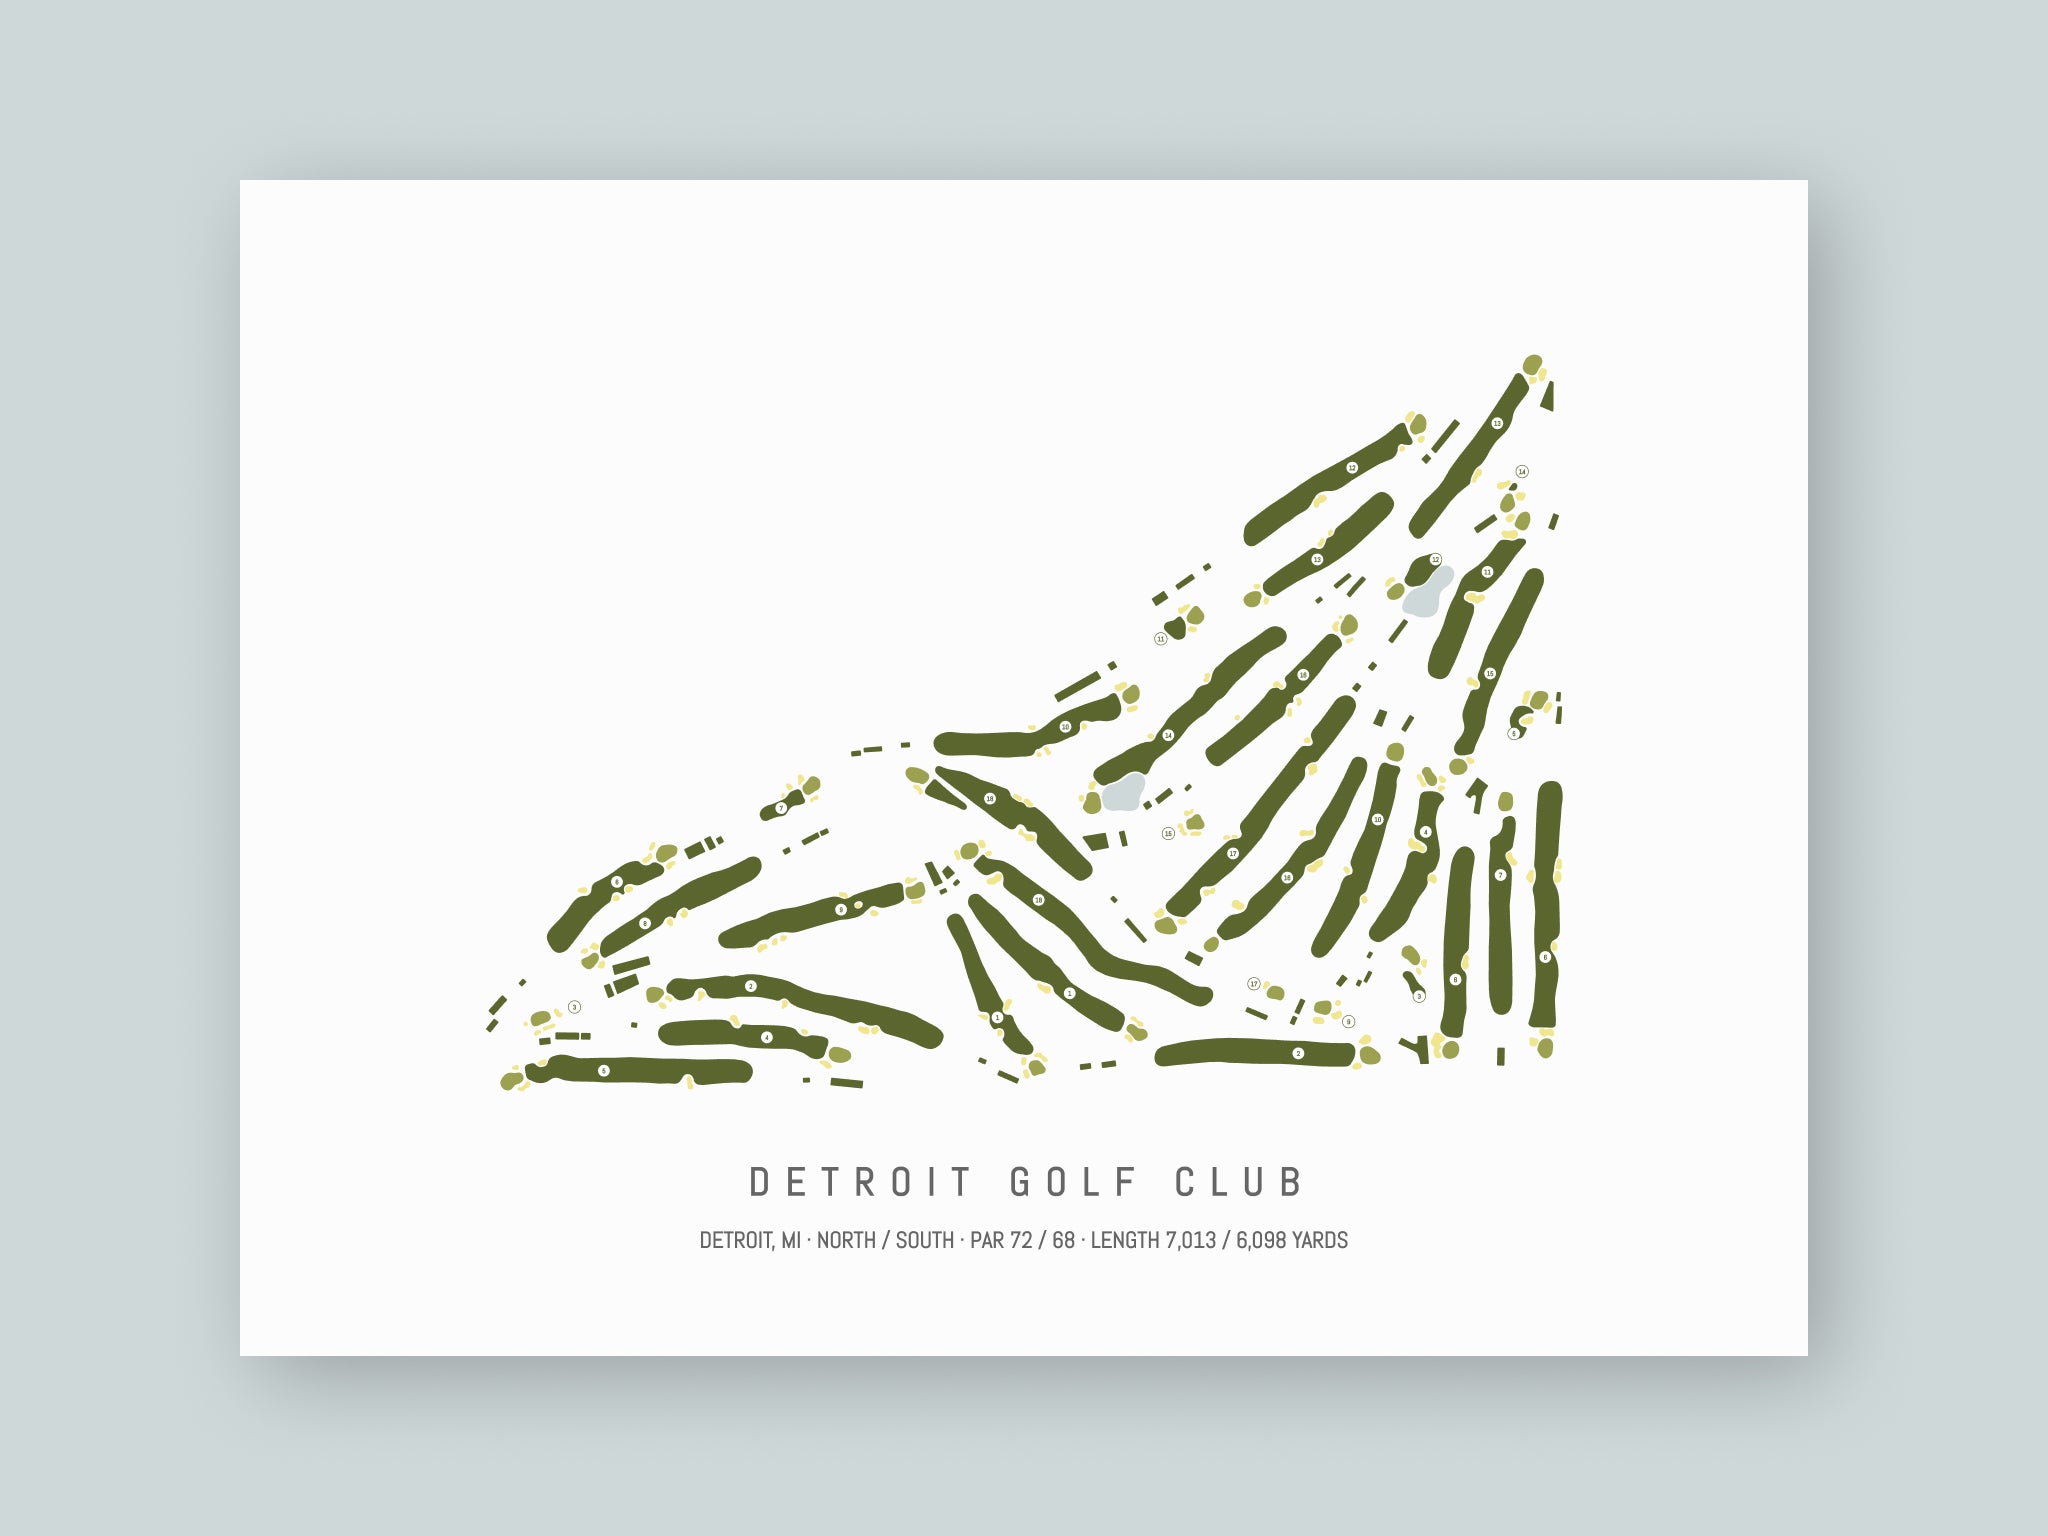 Detroit-Golf-Club-MI--Unframed-24x18-With-Hole-Numbers